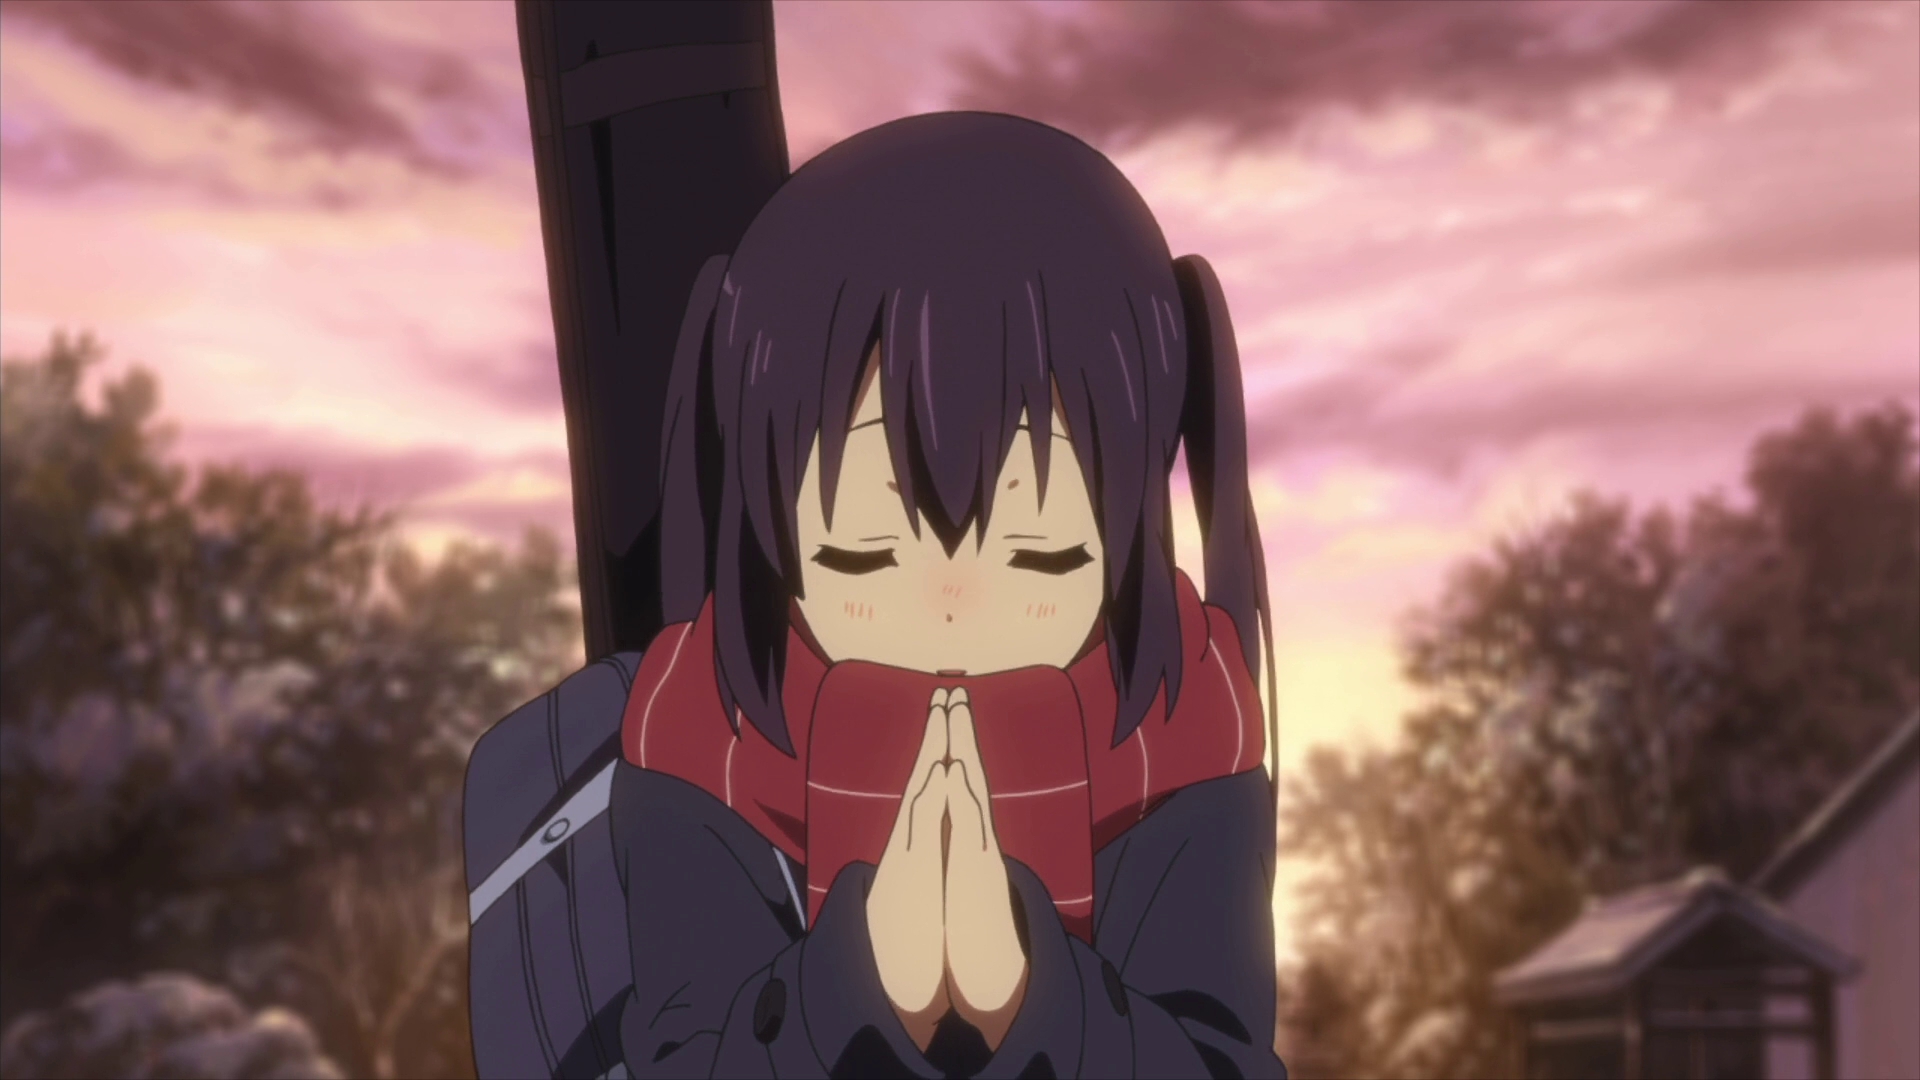 Sedge praying anime girl 2d peaceful expression ge by lolococo99 on  DeviantArt